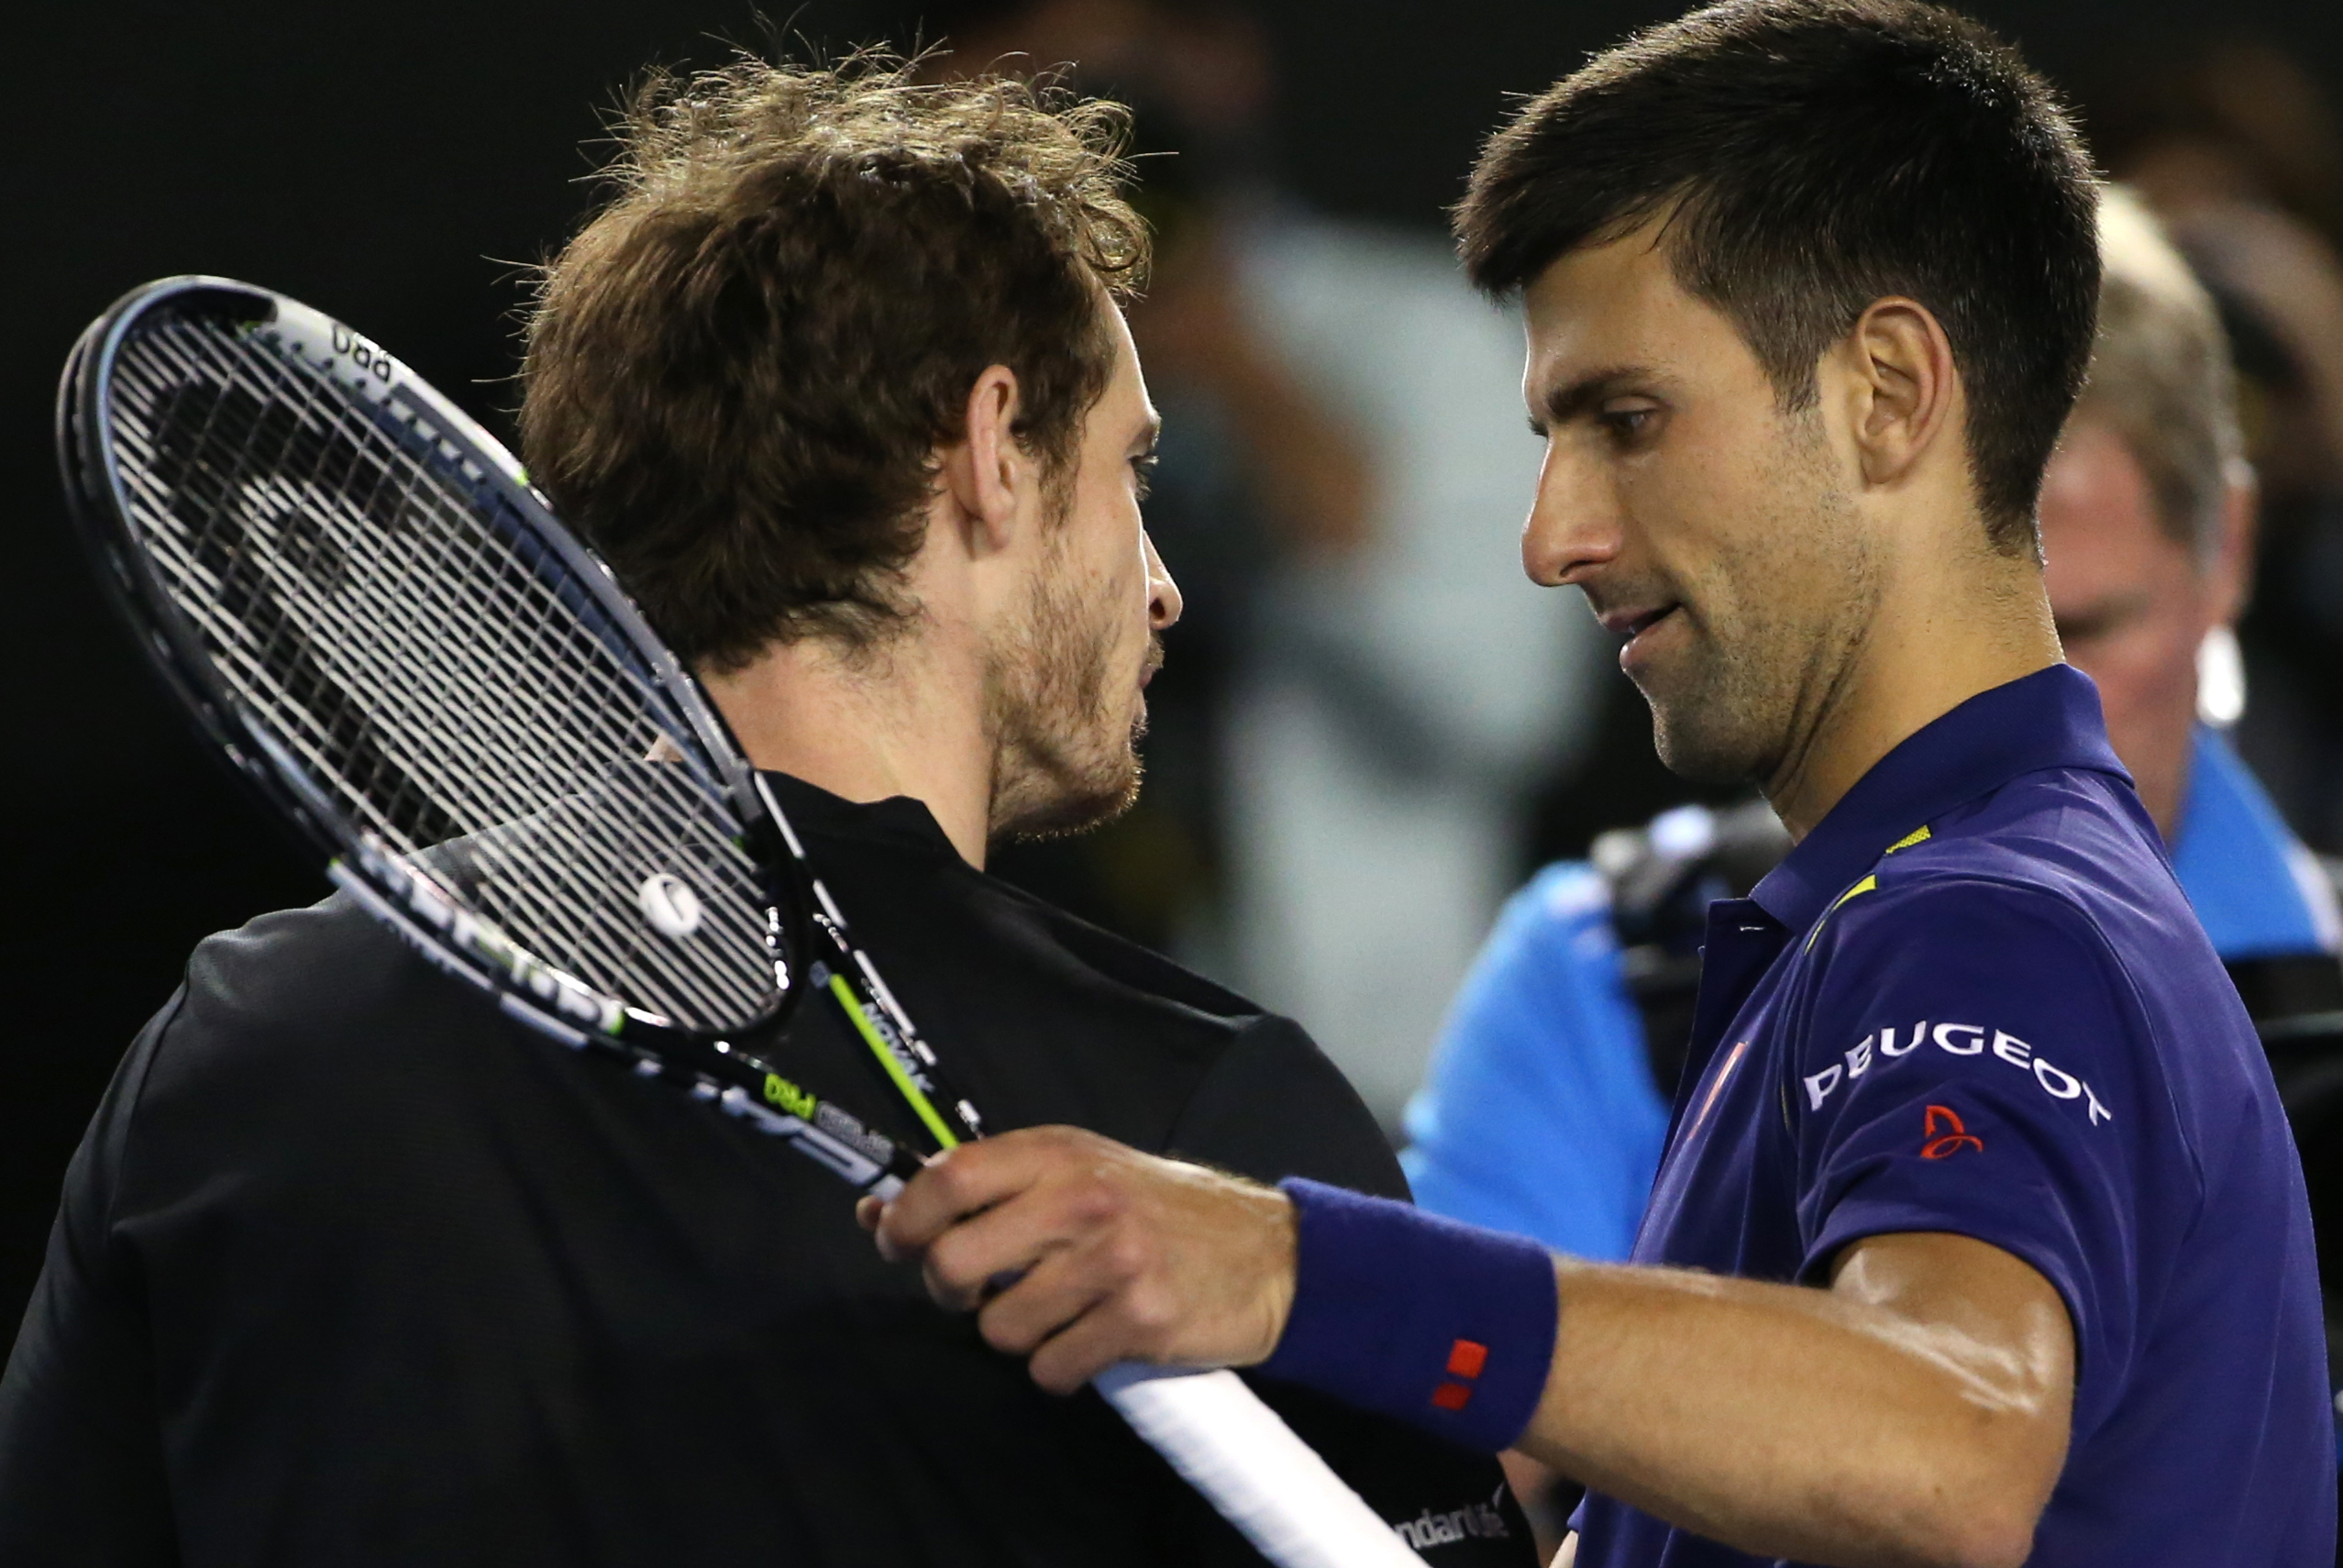 Australian Open 2016: Winners and Losers Melbourne | Bleacher Report | Latest News, Videos and Highlights